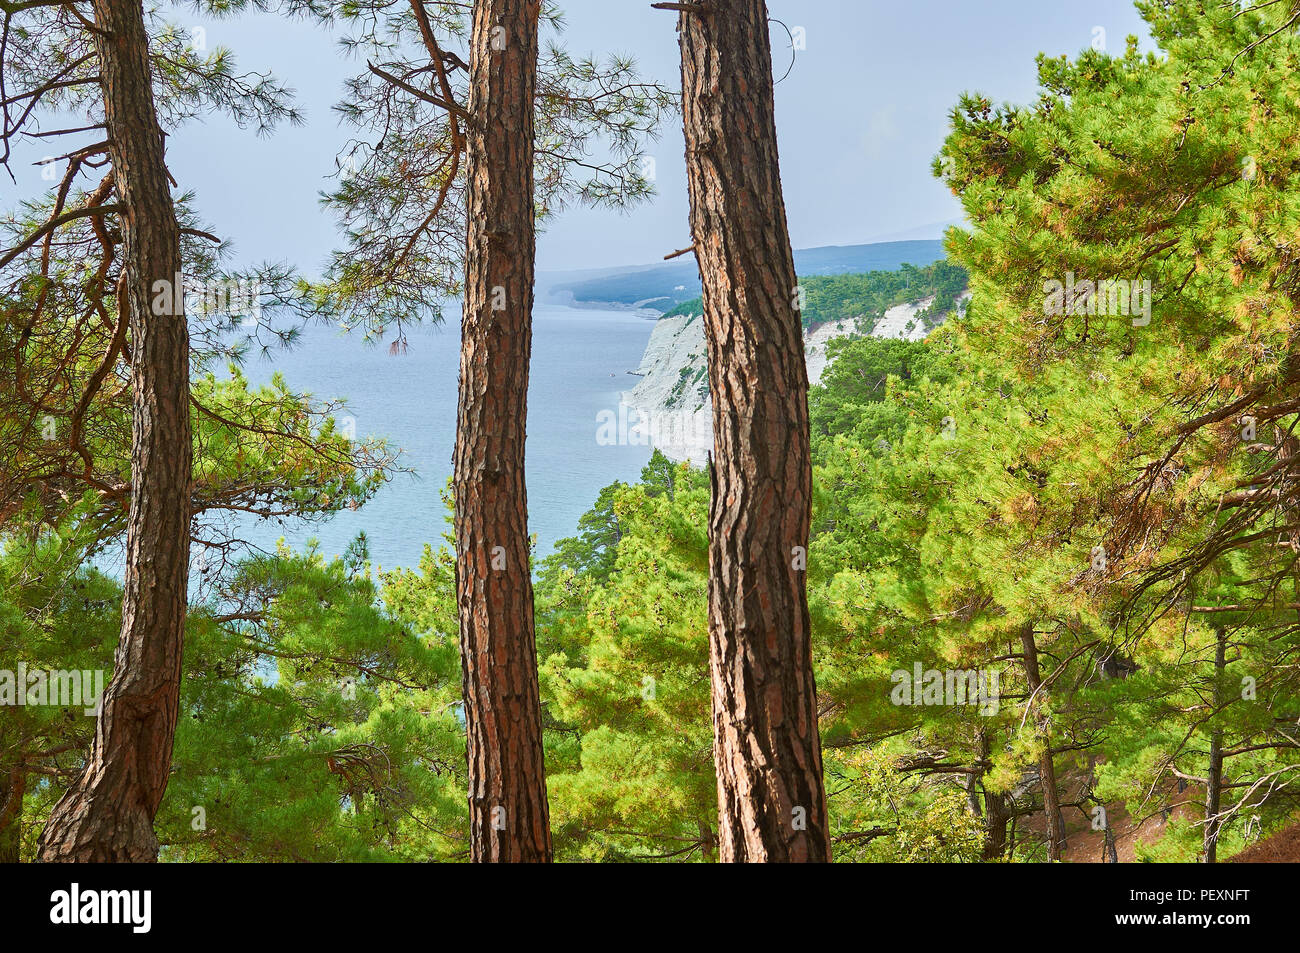 A breathtaking view from the relic pine forest (Pinus brutia, Turkish pine) on the expanses of the Black Sea. Stock Photo